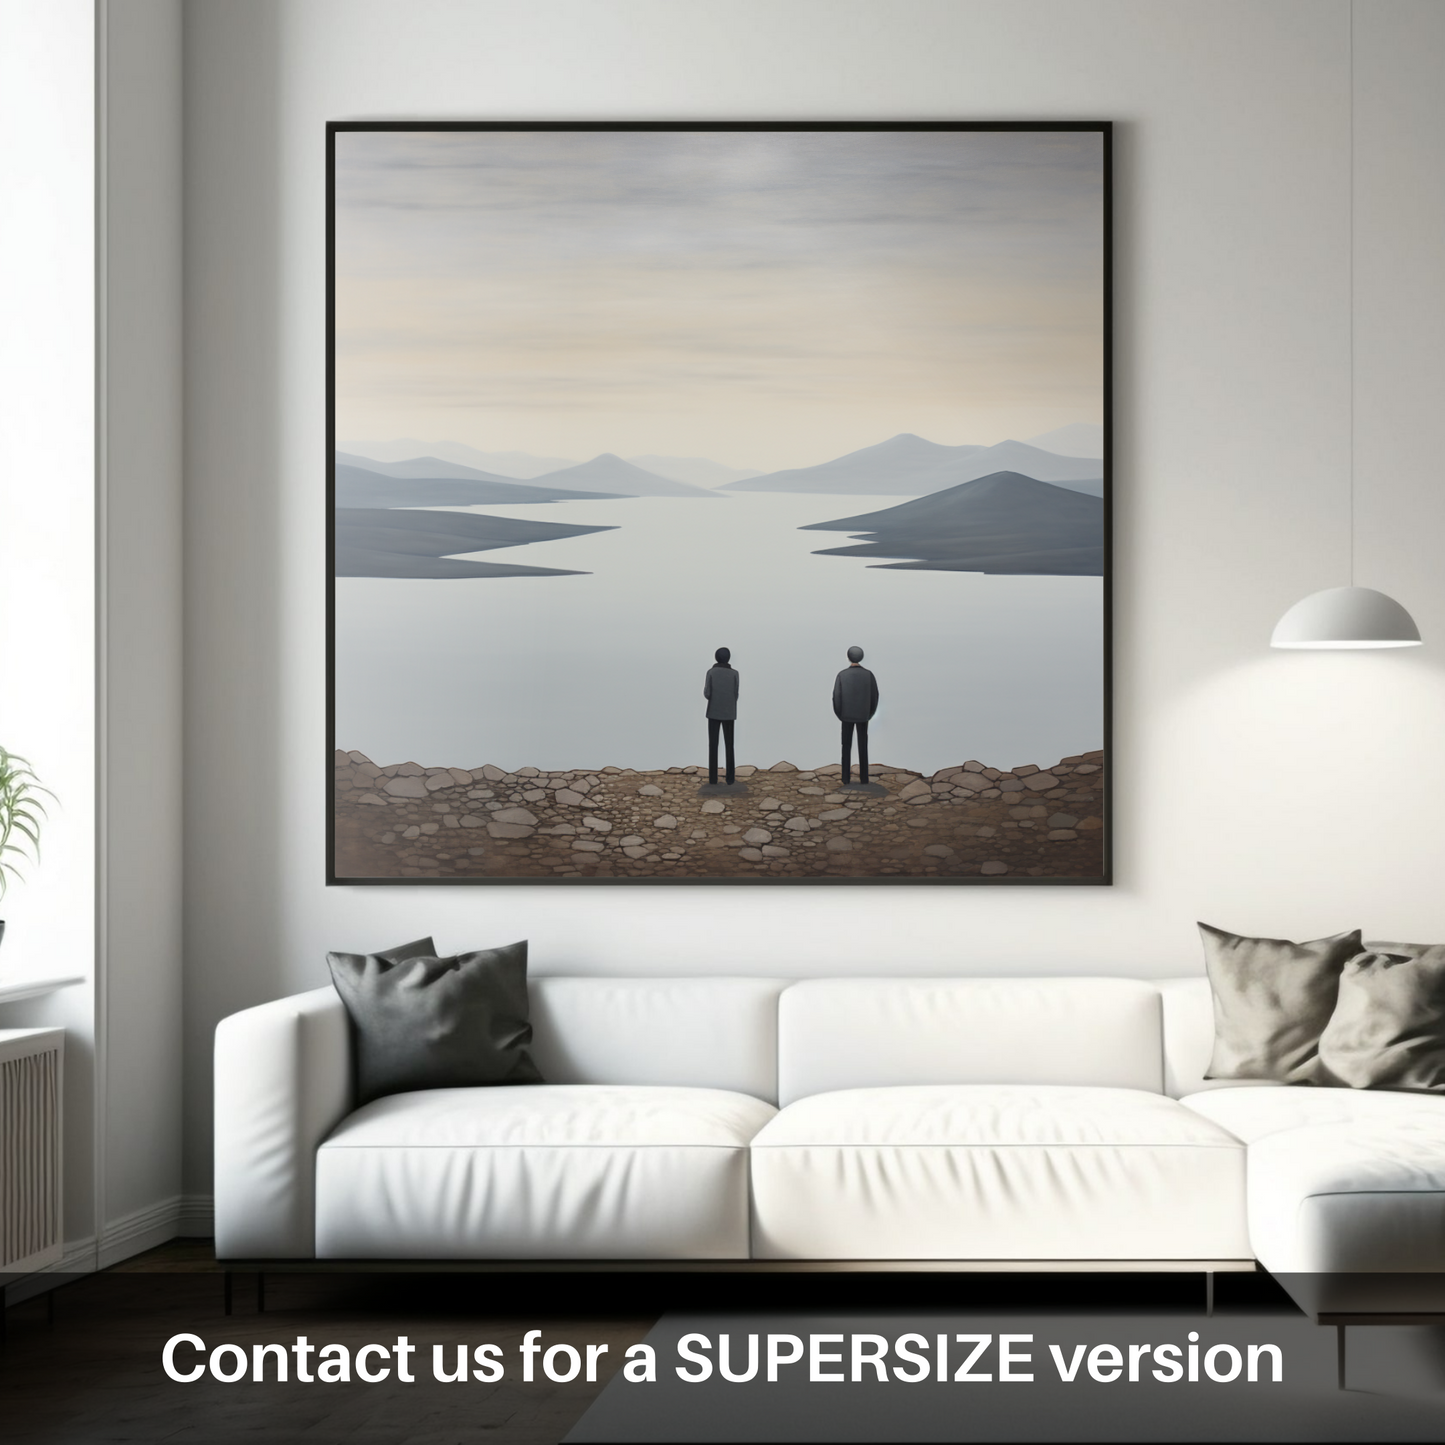 Huge supersize print of Two hikers looking out on Loch Lomond